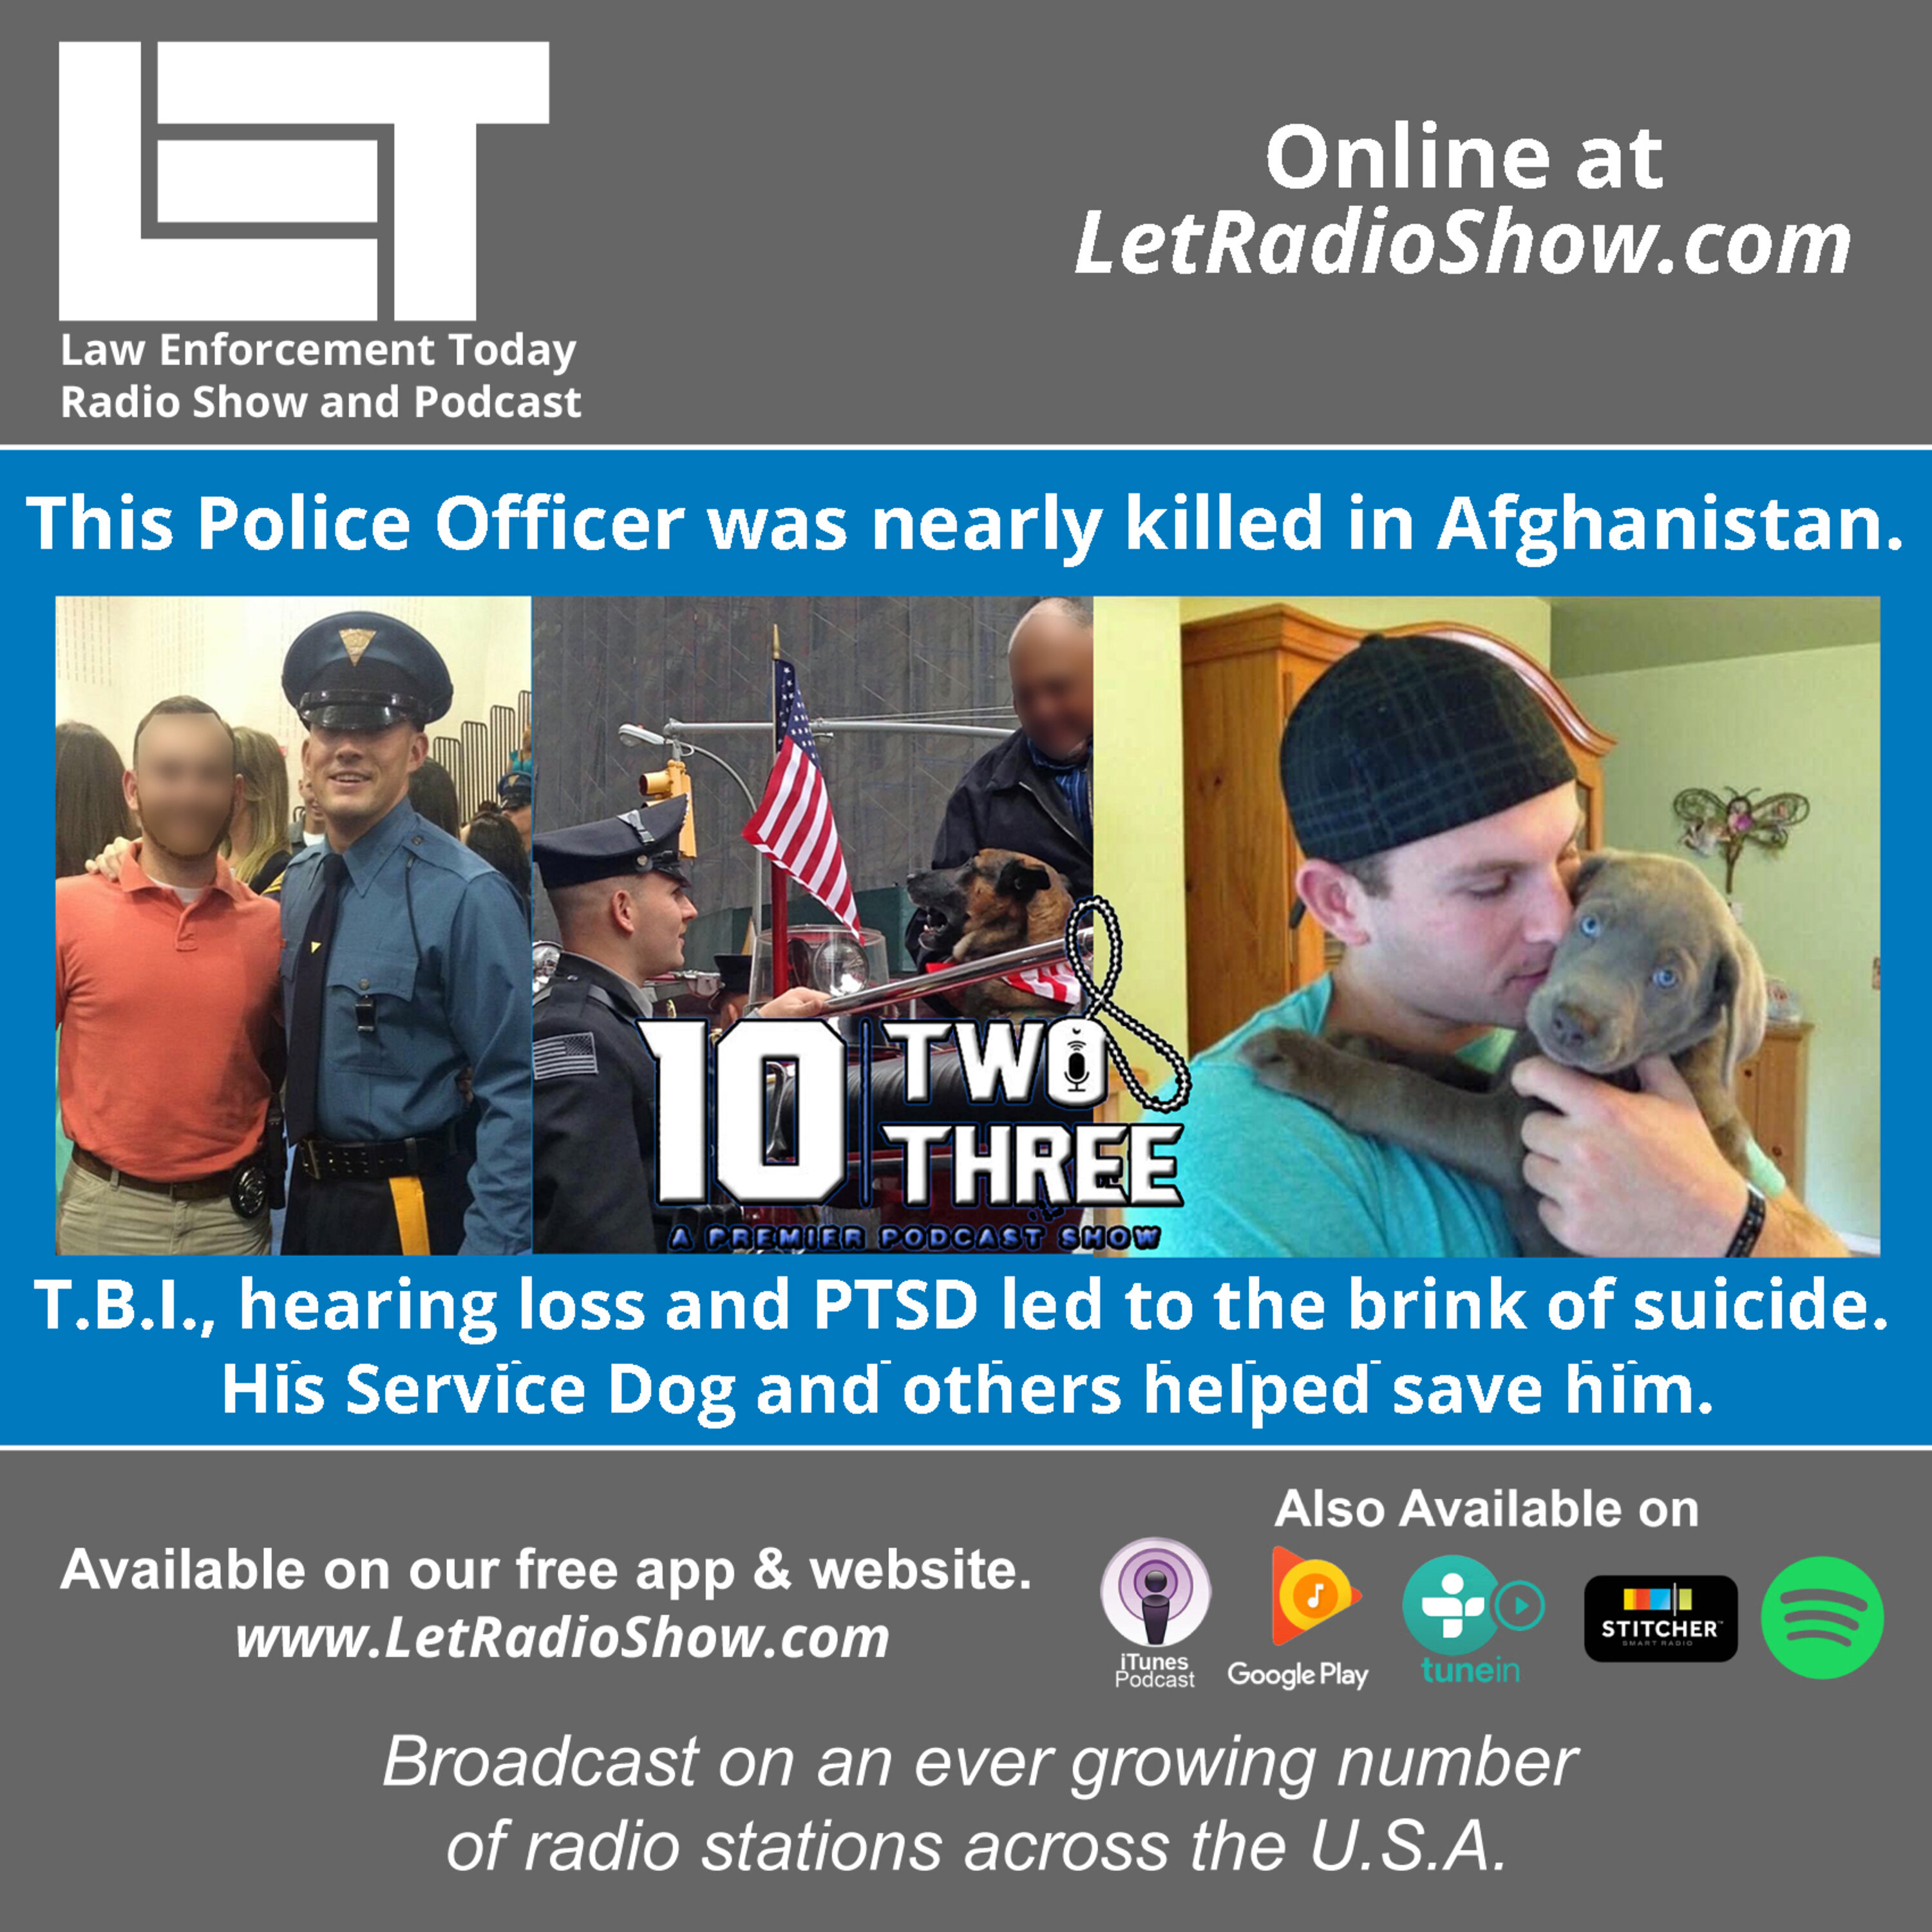 S5E61: This Police Officer was nearly killed in Afghanistan. T.B.I., hearing loss and PTSD led to the brink of suicide.